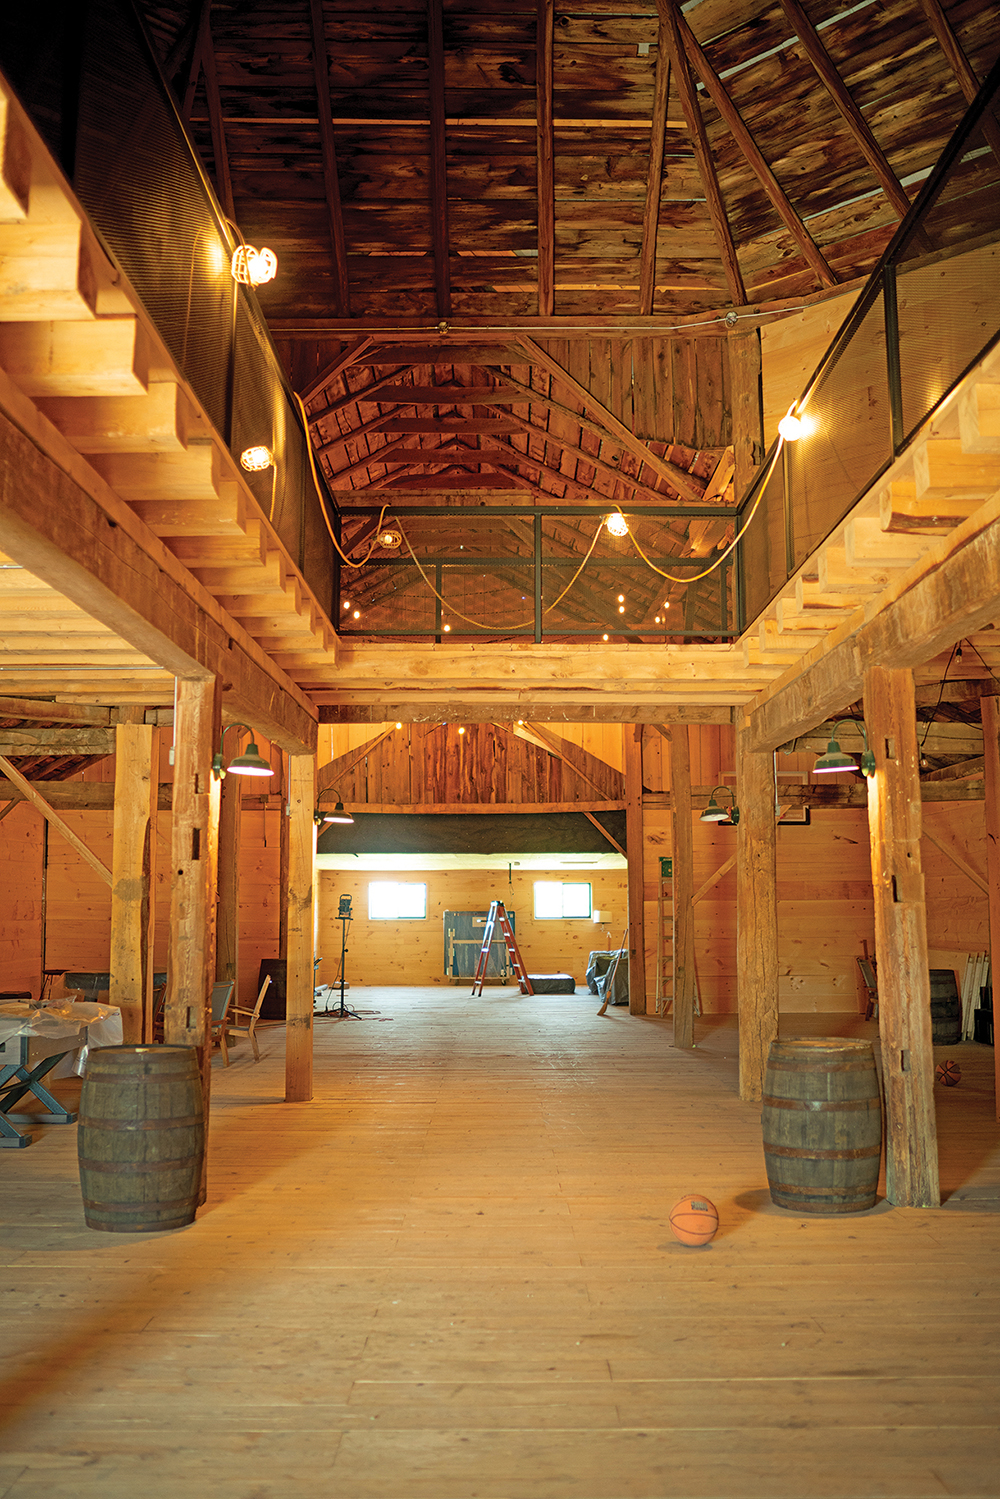 Some old barns are extensively transformed with modern amenities and technology.